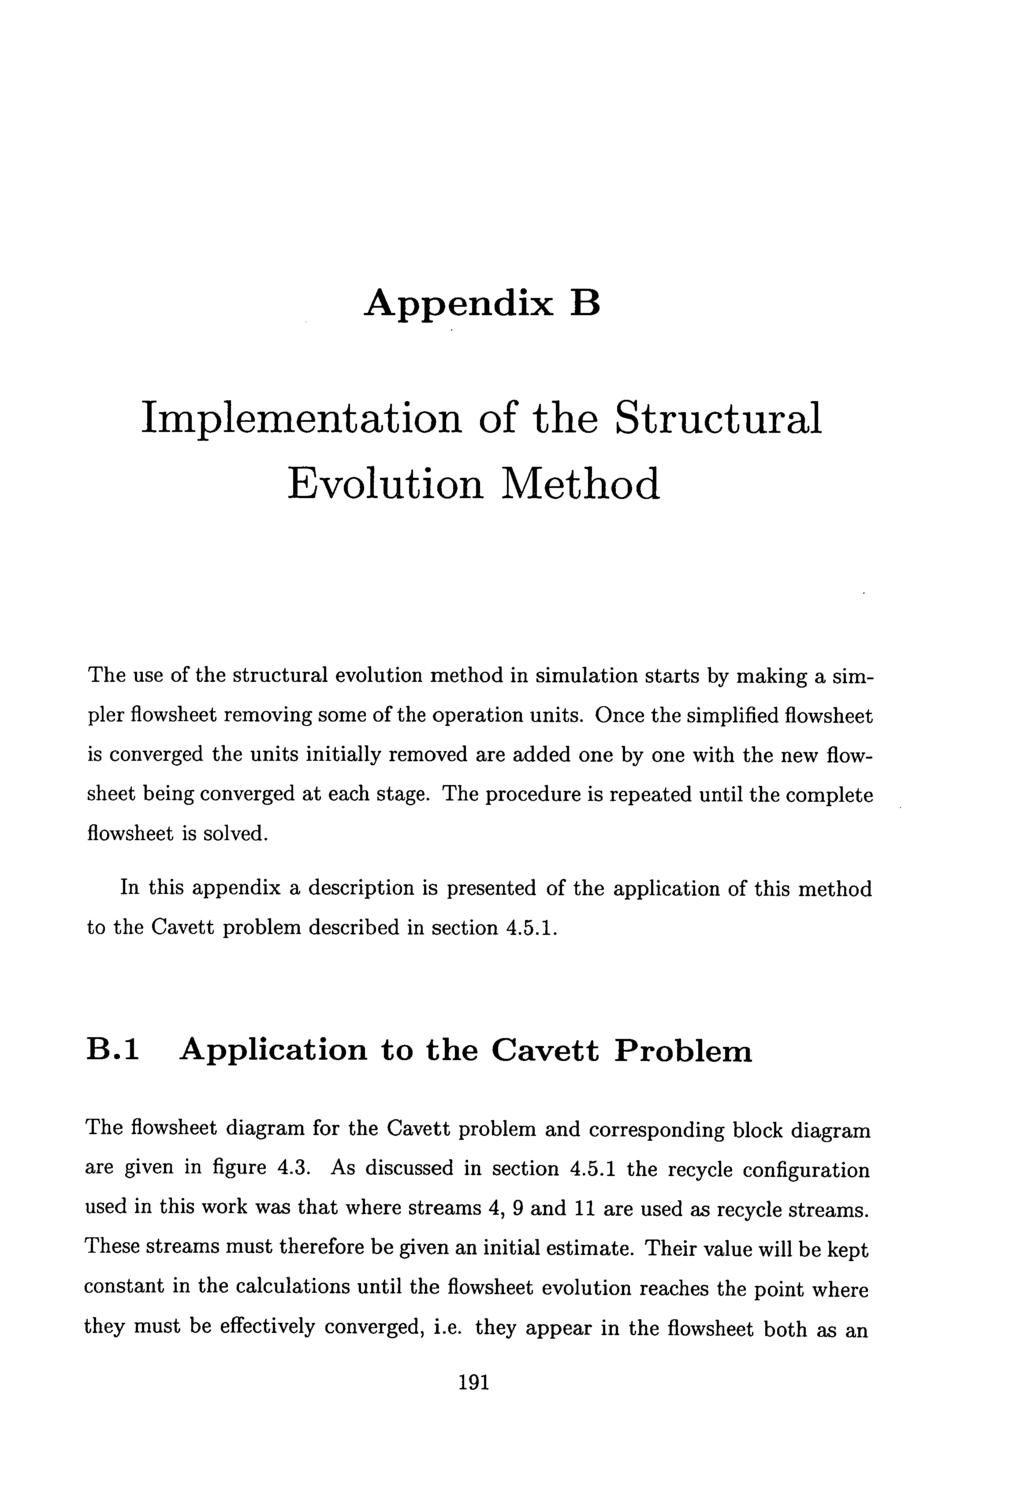 Appendix B Implementation of the Structural Evolution Method The use of the structural evolution method in simulation starts by making a simpler fiowsheet removing some of the operation units.